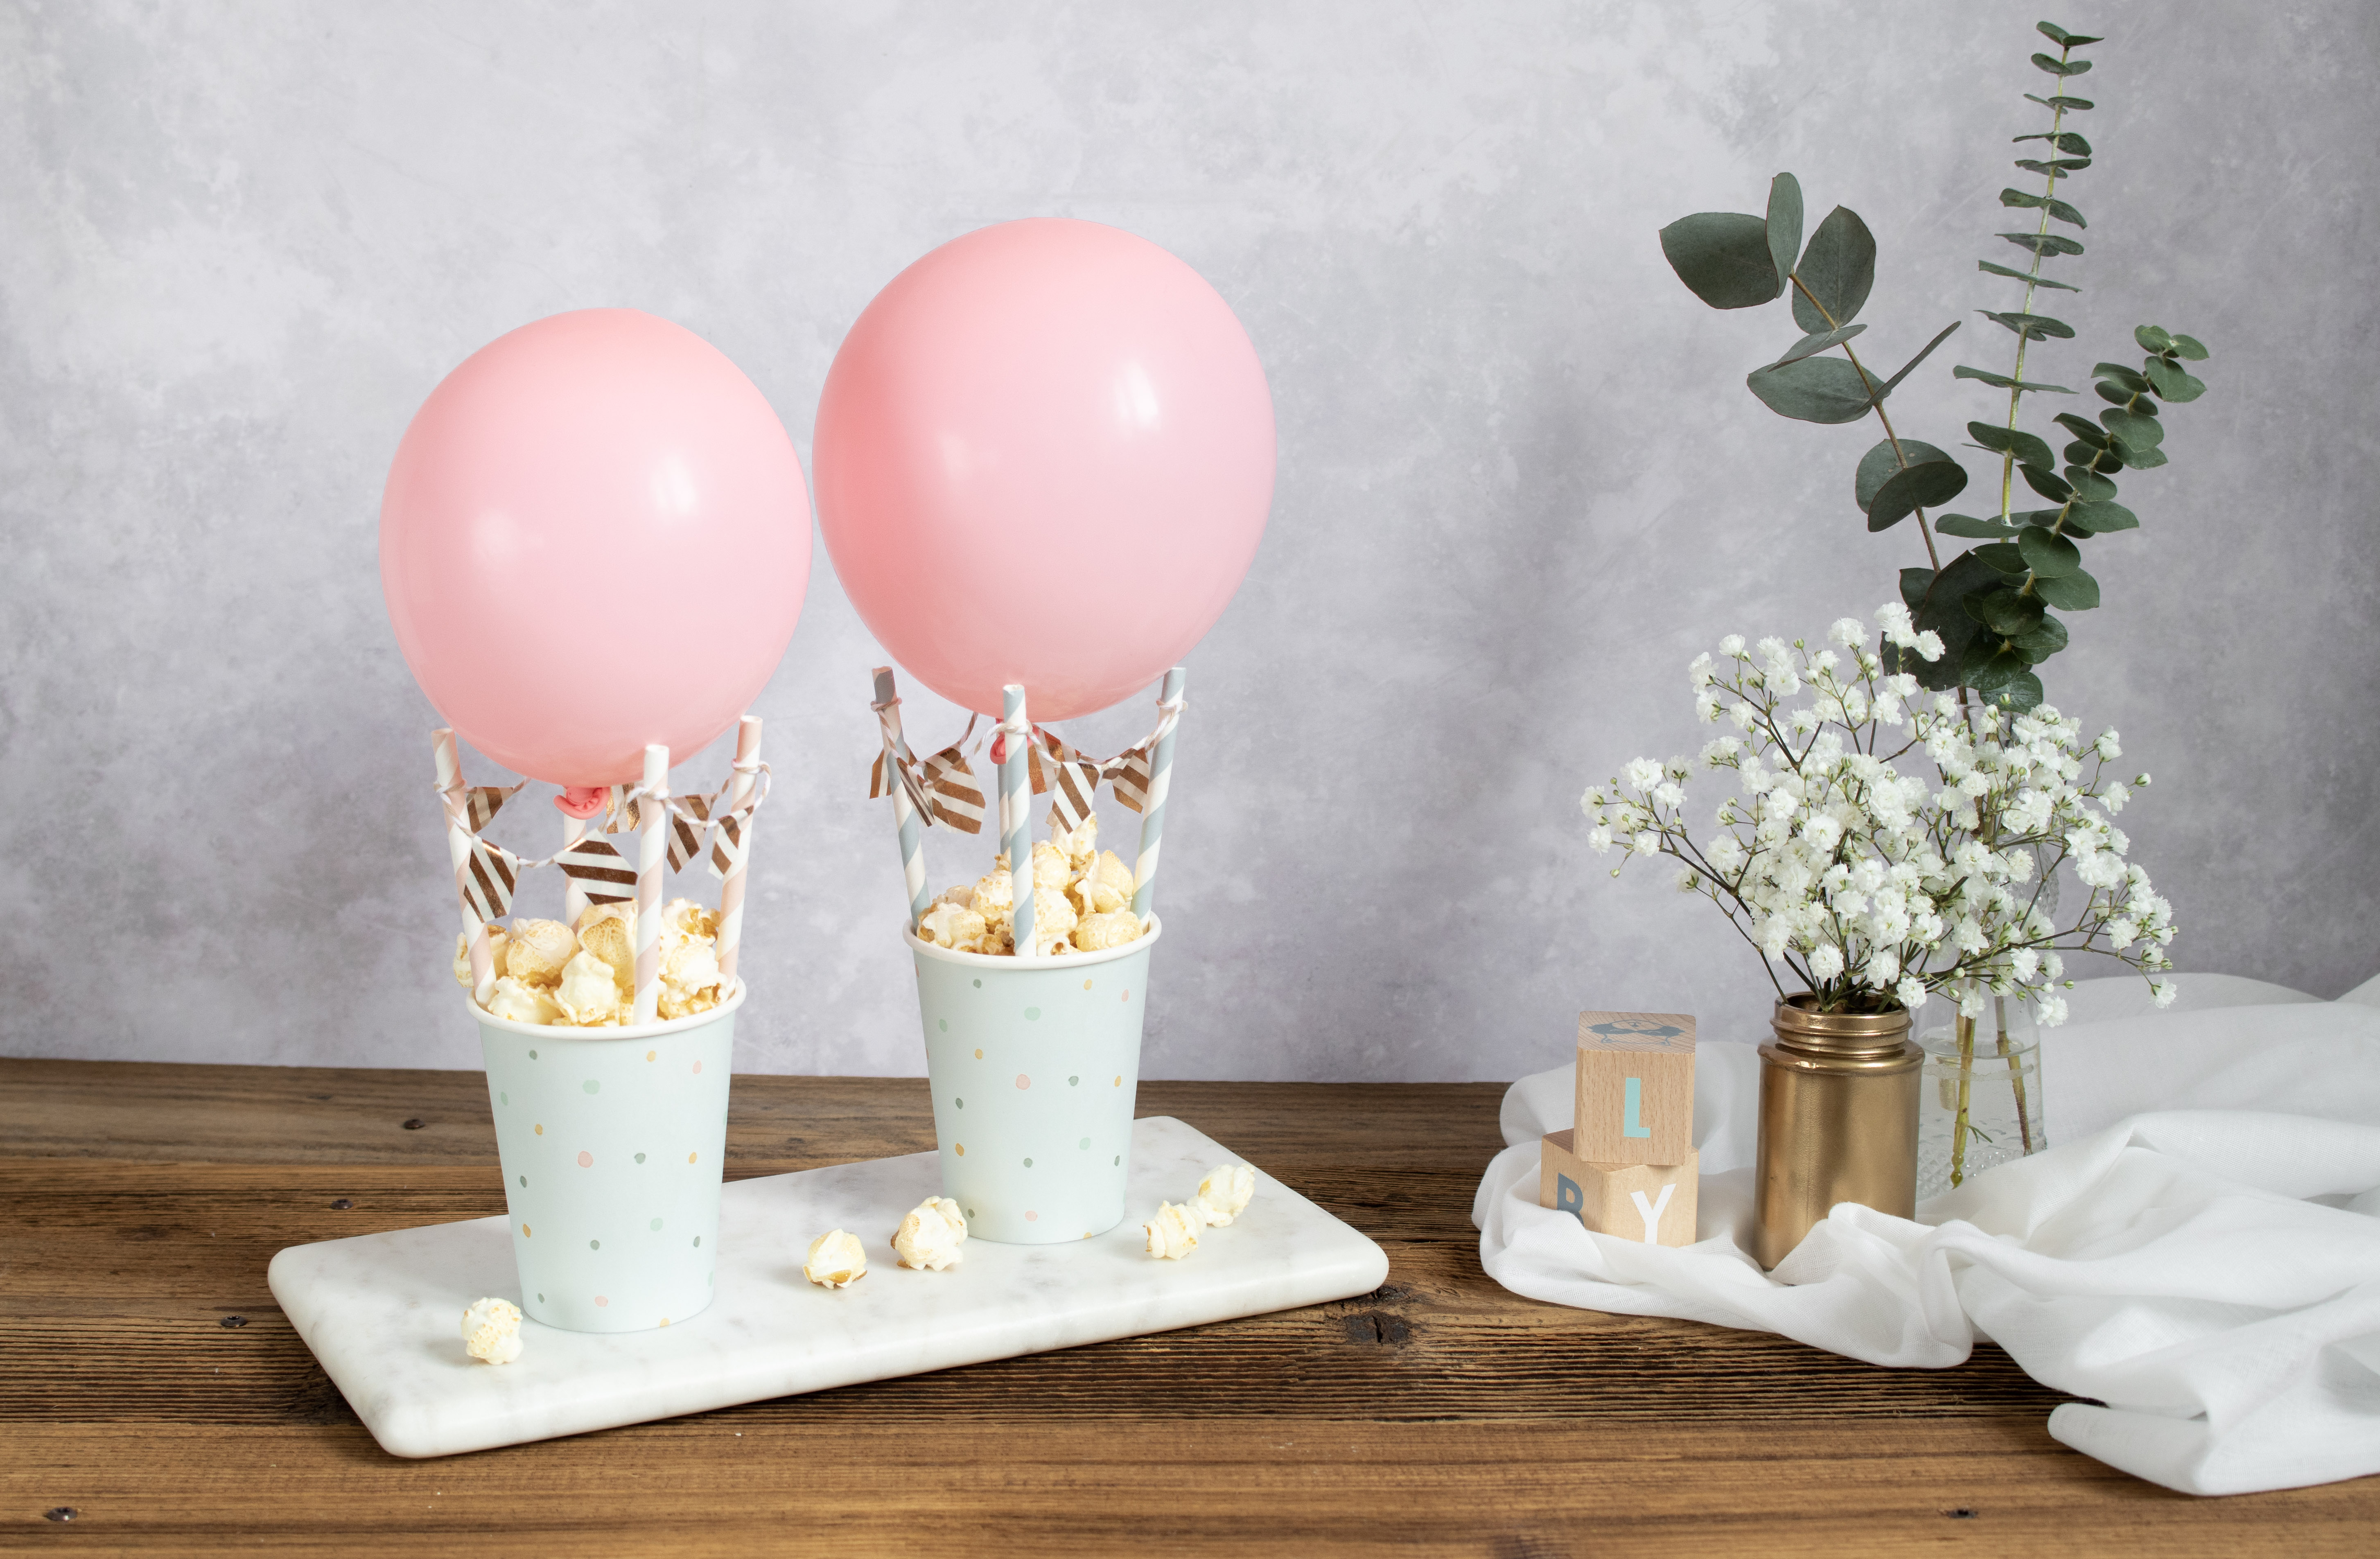 DIY hot air balloons filled with popcorn used for decorating for a baby shower.